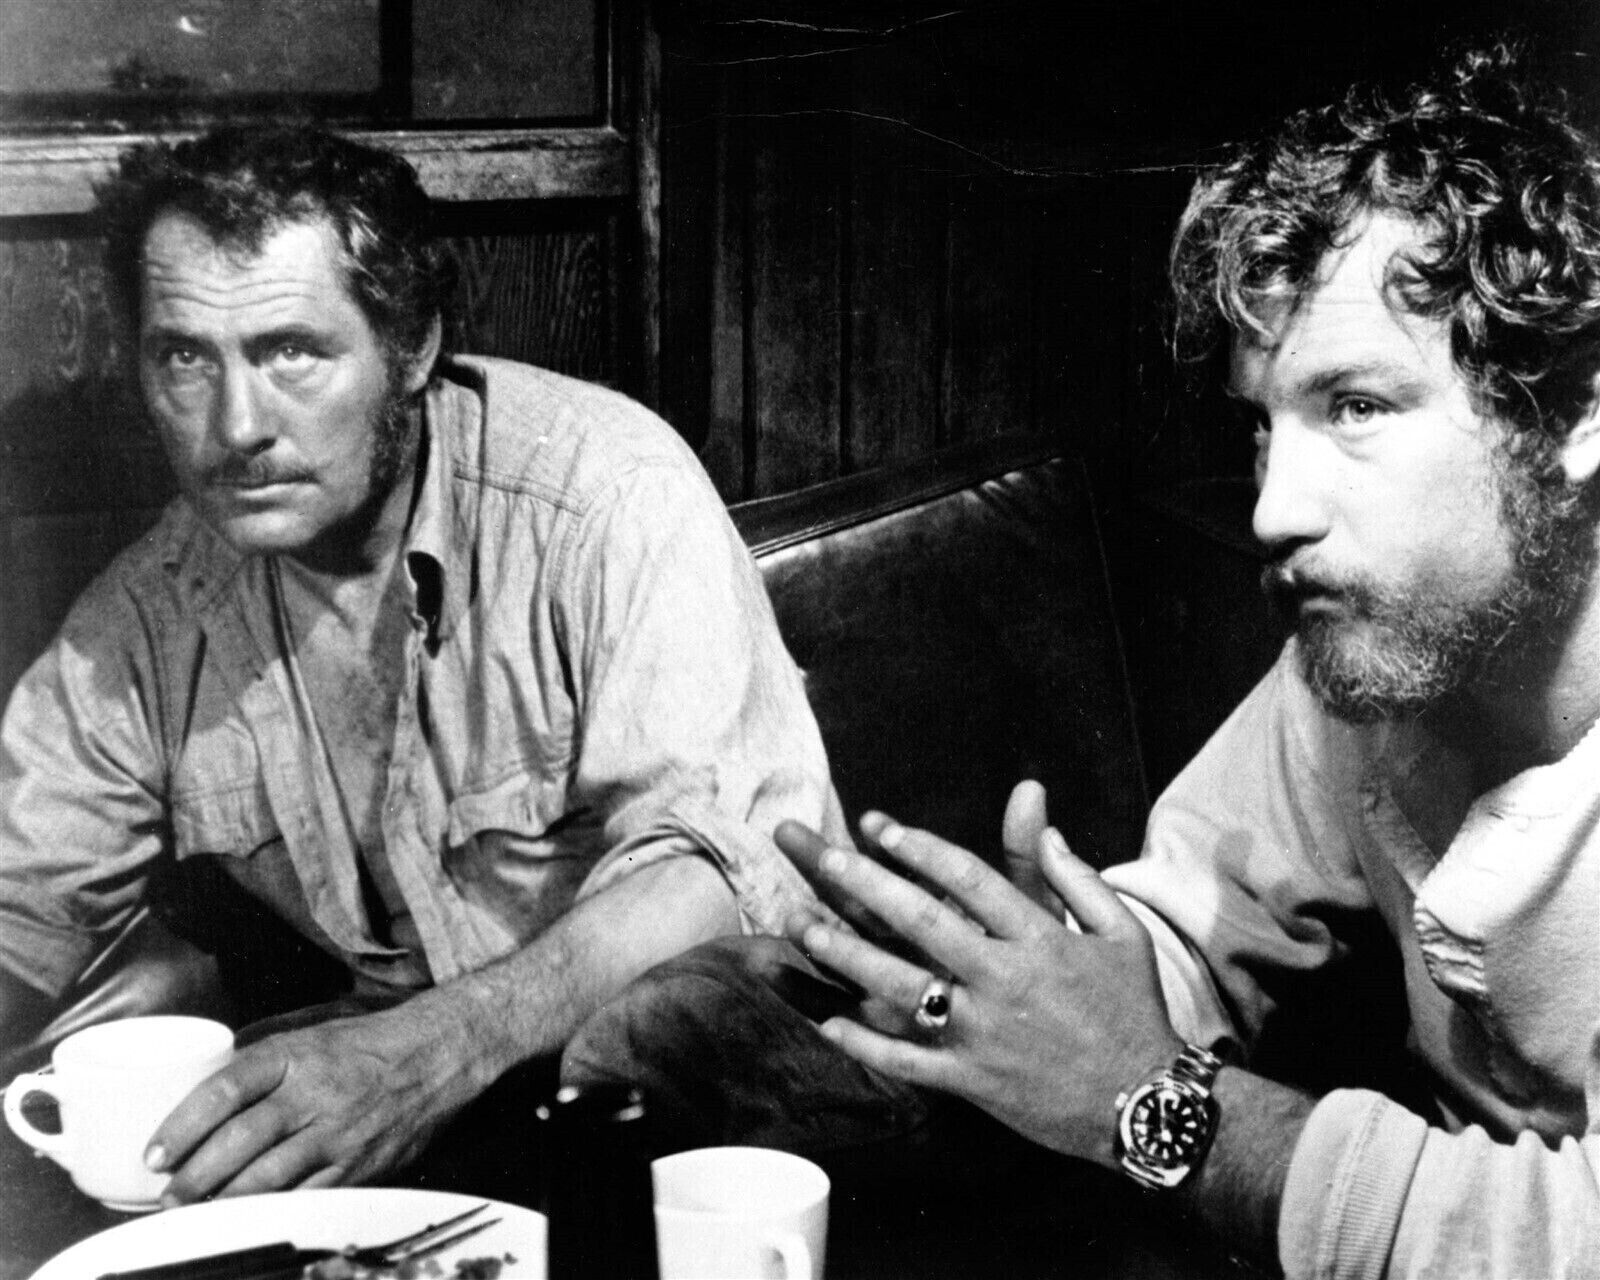 Jaws Robert Shaw 7 Richard Dreyfus at dining table in Orca 5x7 inch photo